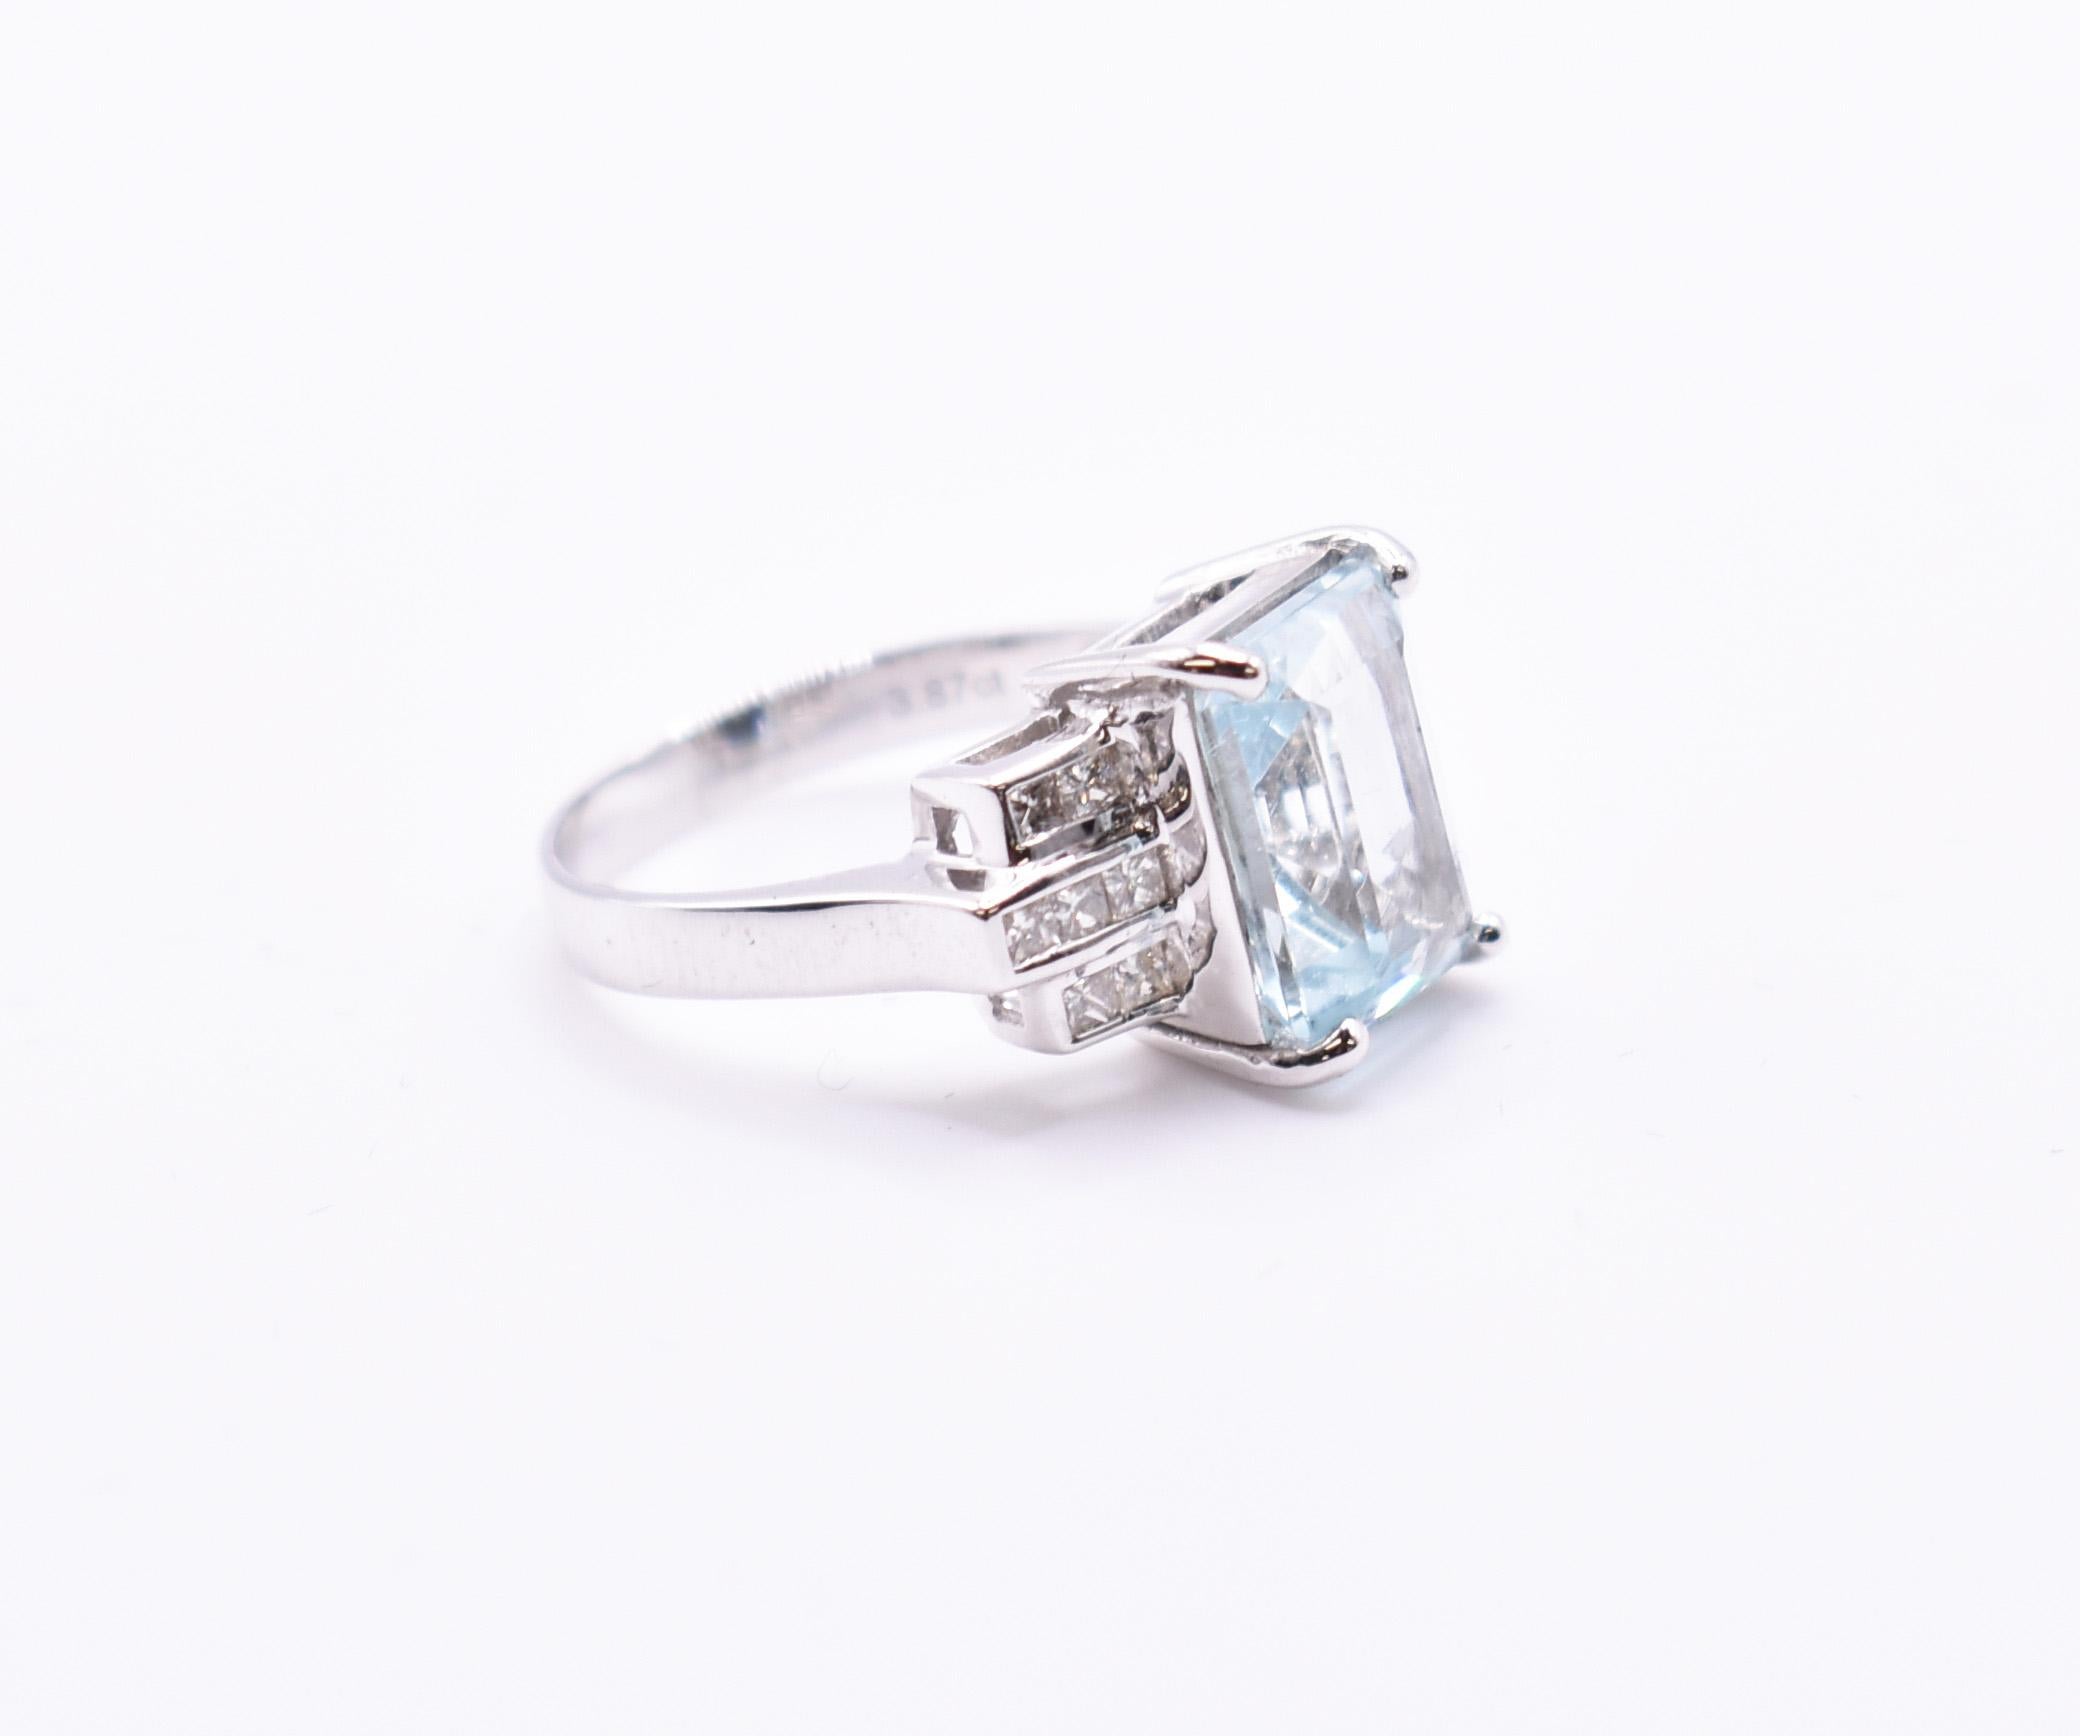 A lovely 18k white gold Aquamarine & Diamond ring. A2= 3.87ct. Diamonds: 0.38ct SI1 H colour.

Metal: 18k White Gold
Colour: H
Clarity: SI1
Diamond Carat Weight: 0.38ct
A2 Aquamarine: 3.87ct
Ring size: UK N US 7